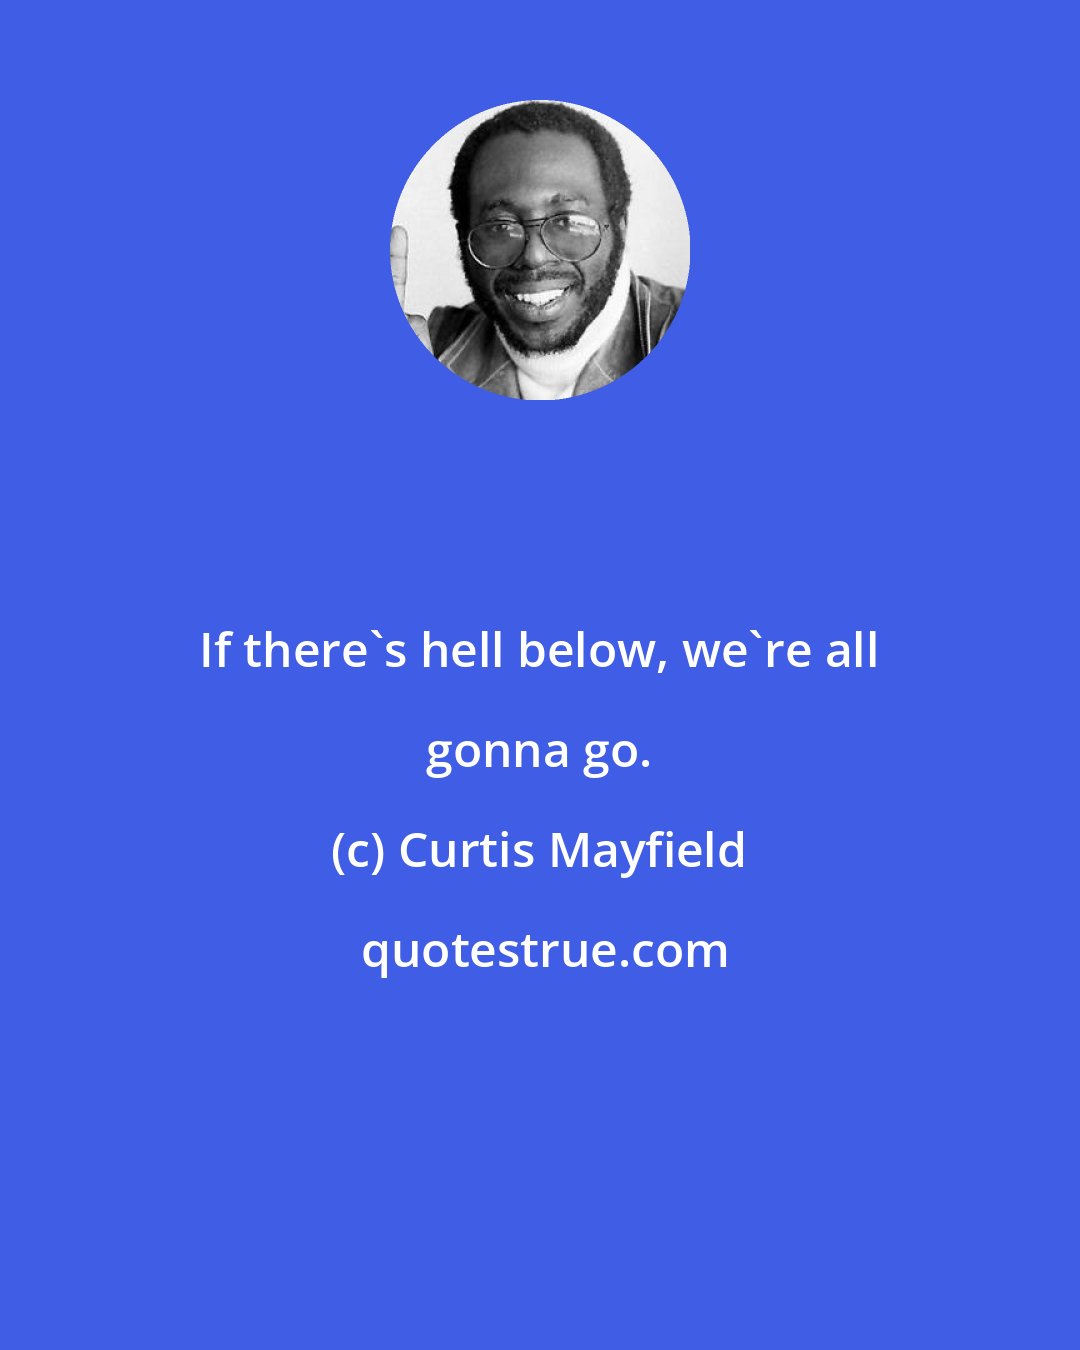 Curtis Mayfield: If there's hell below, we're all gonna go.